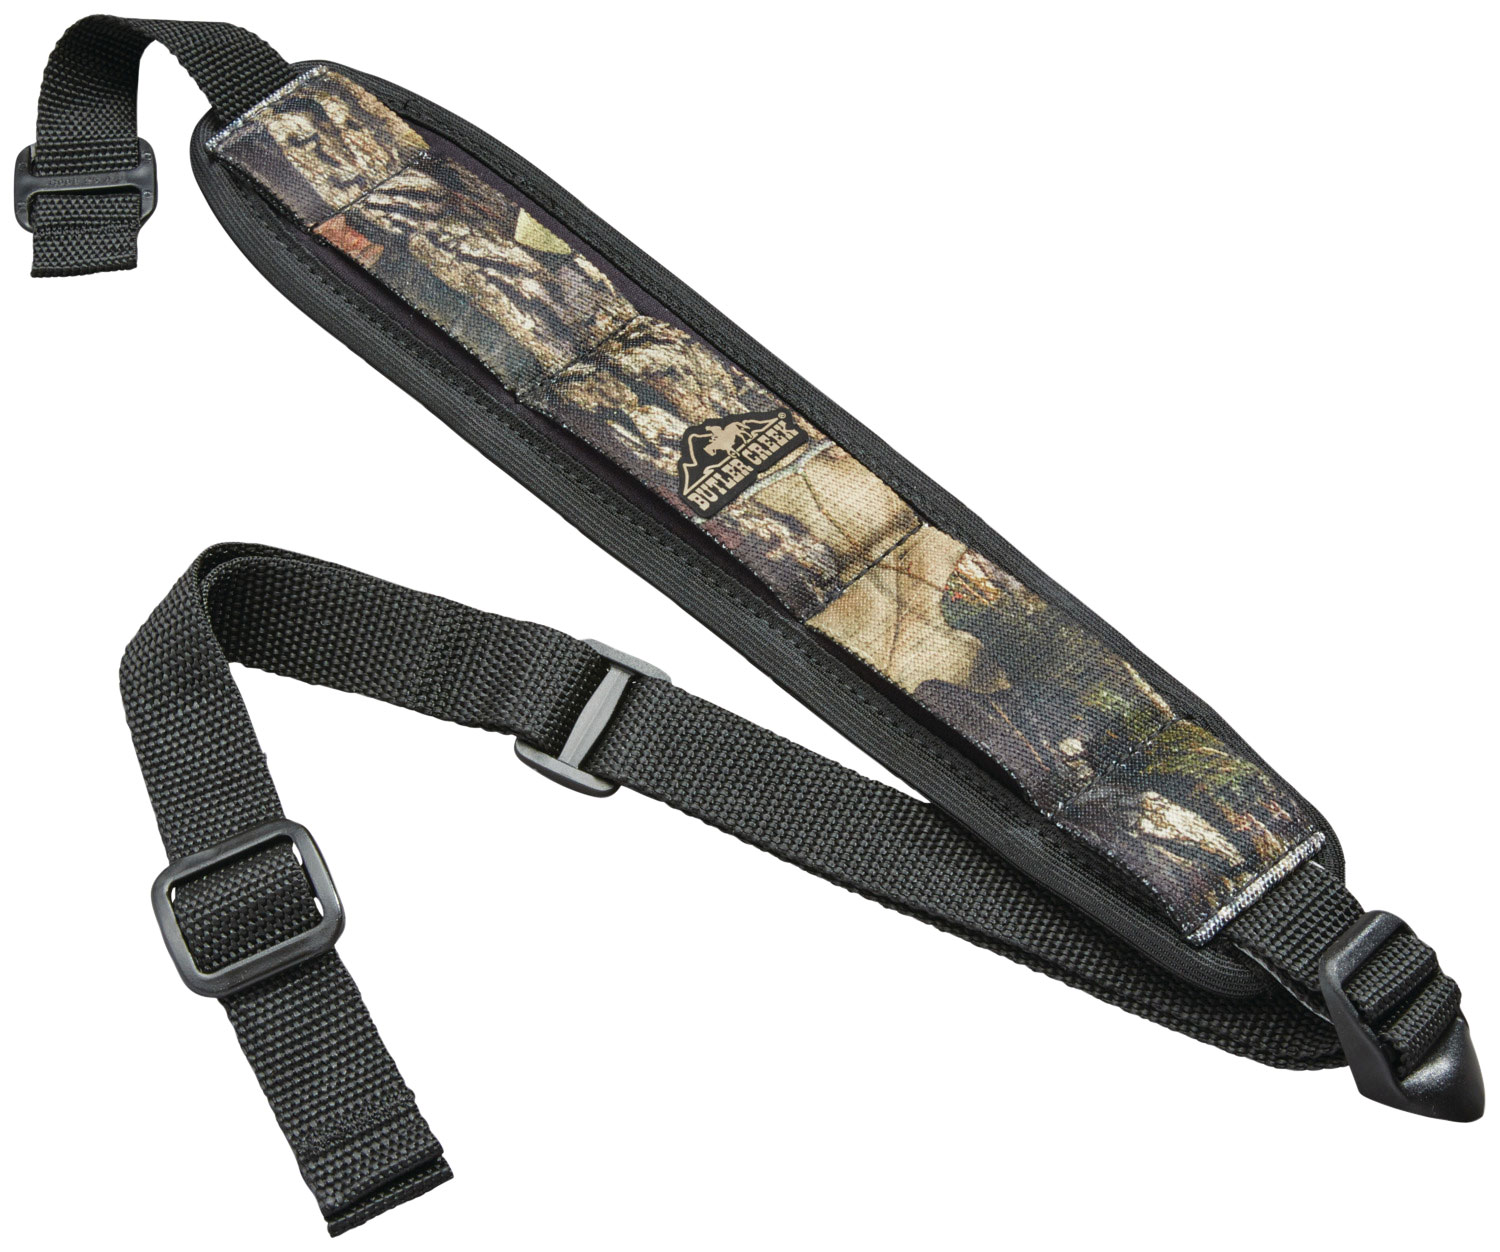 Butler Creek 180017 Comfort Stretch Sling made of Mossy Oak Break-Up Country Neoprene with Non-Slip Grippers, 20